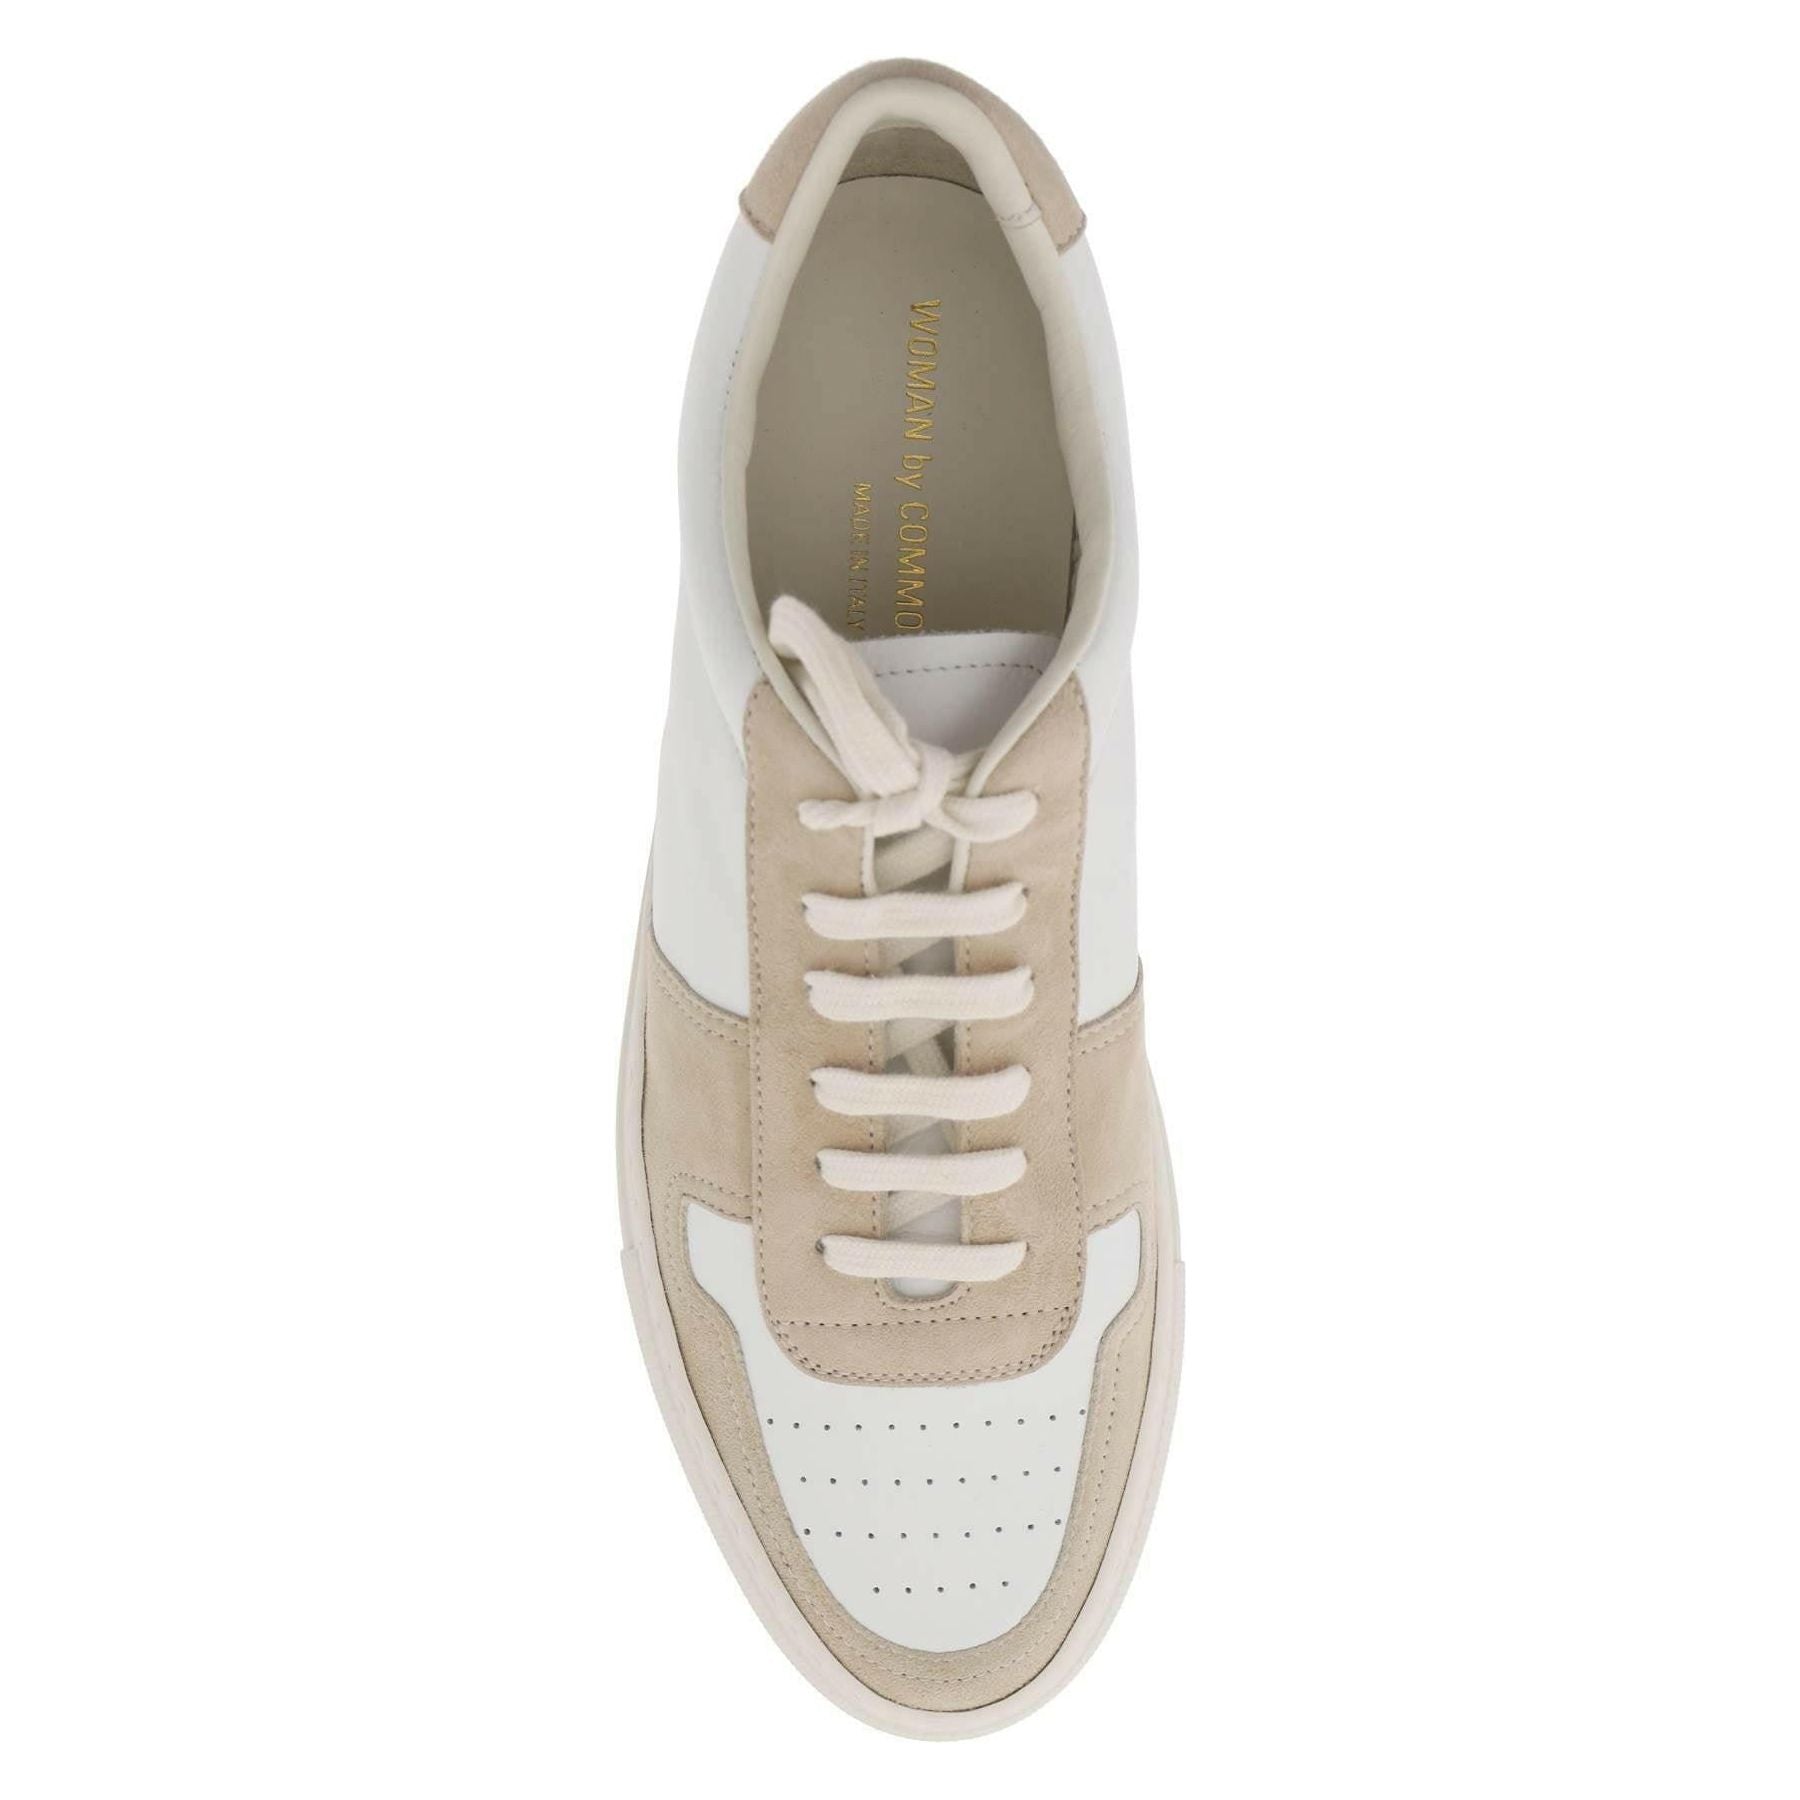 BBall Nappa Leather Sneakers COMMON PROJECTS JOHN JULIA.